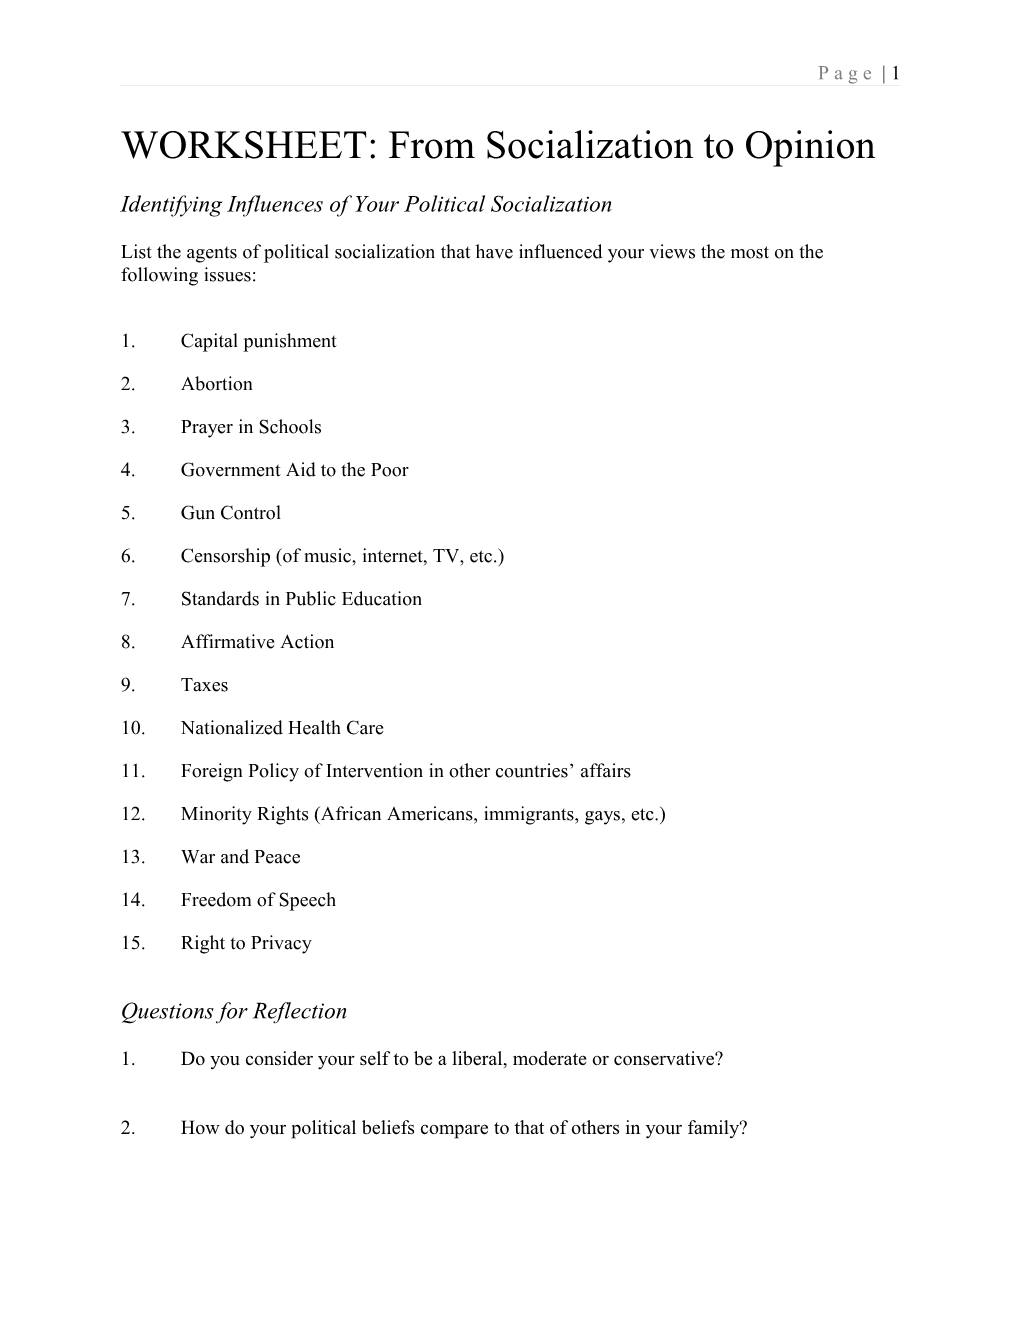 WORKSHEET: from Socialization to Opinion